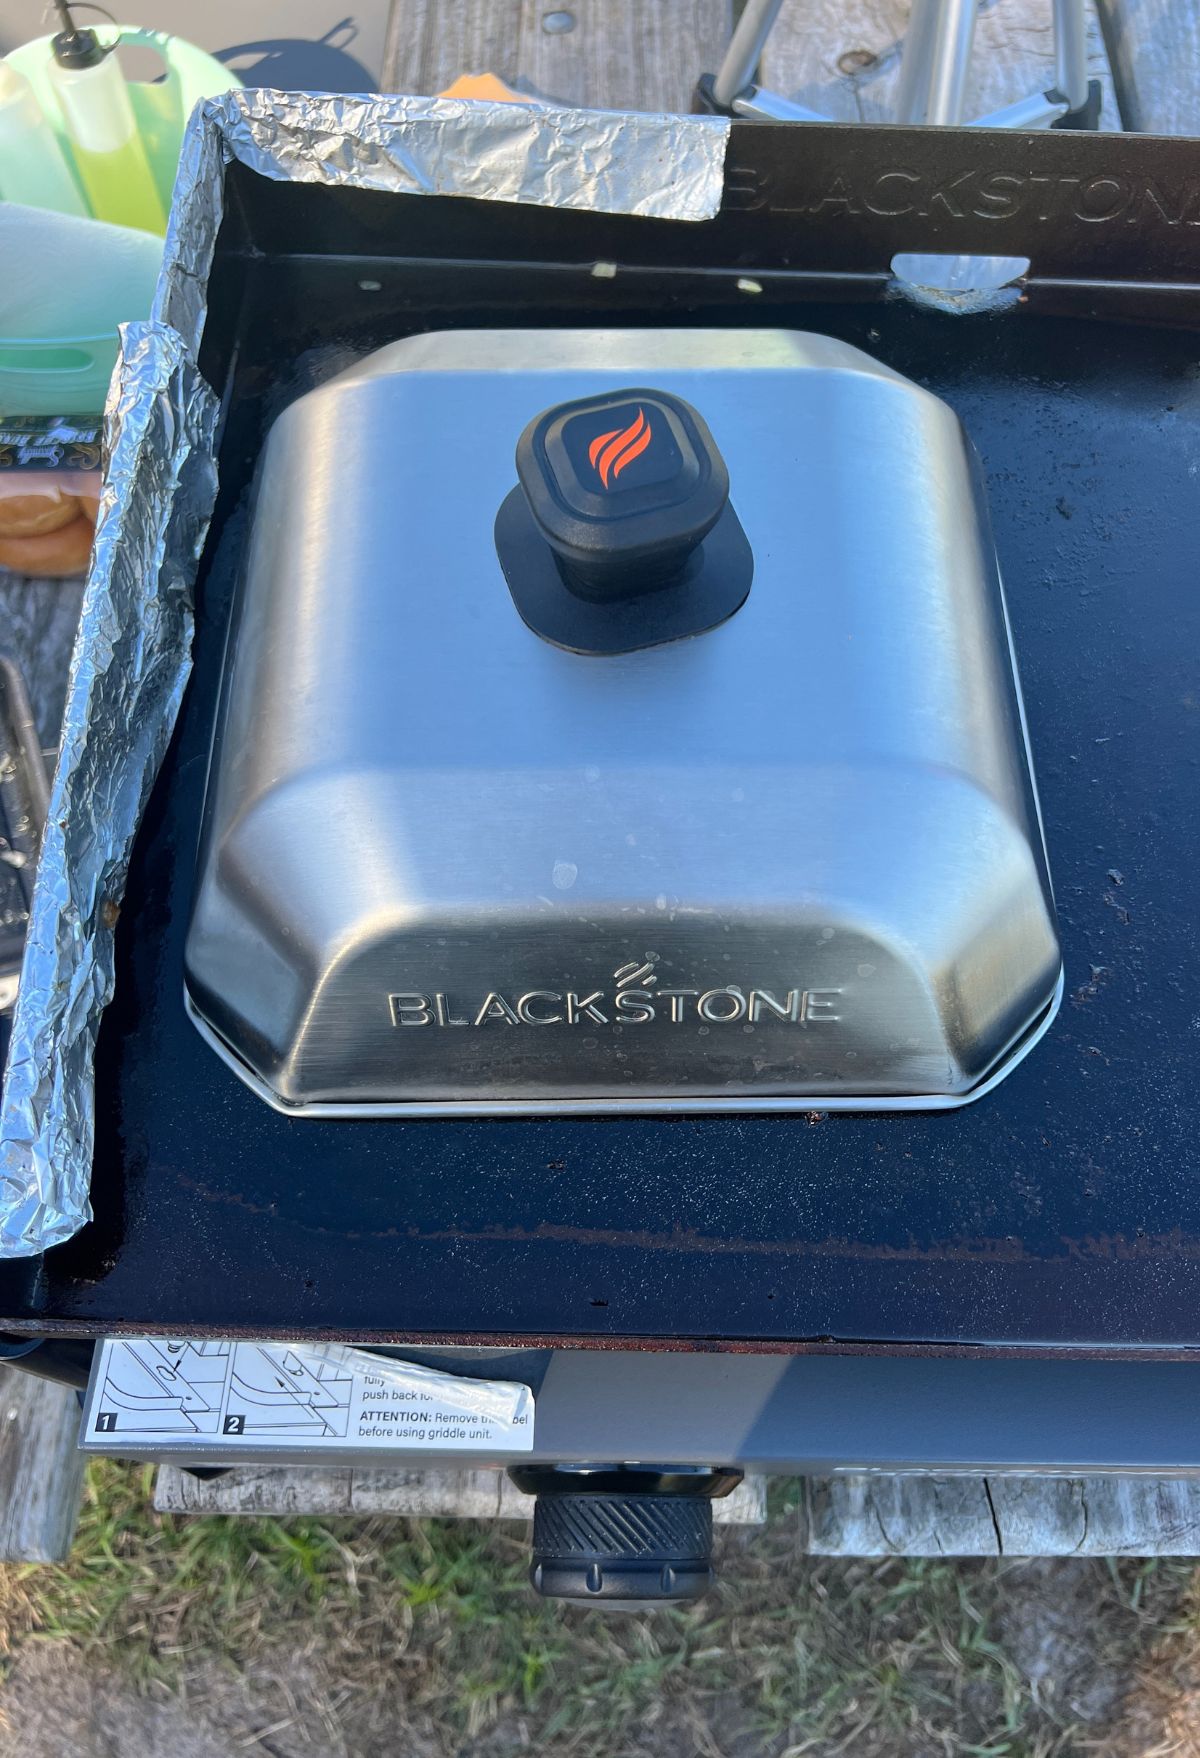 A blackstone grill with a lid on it.